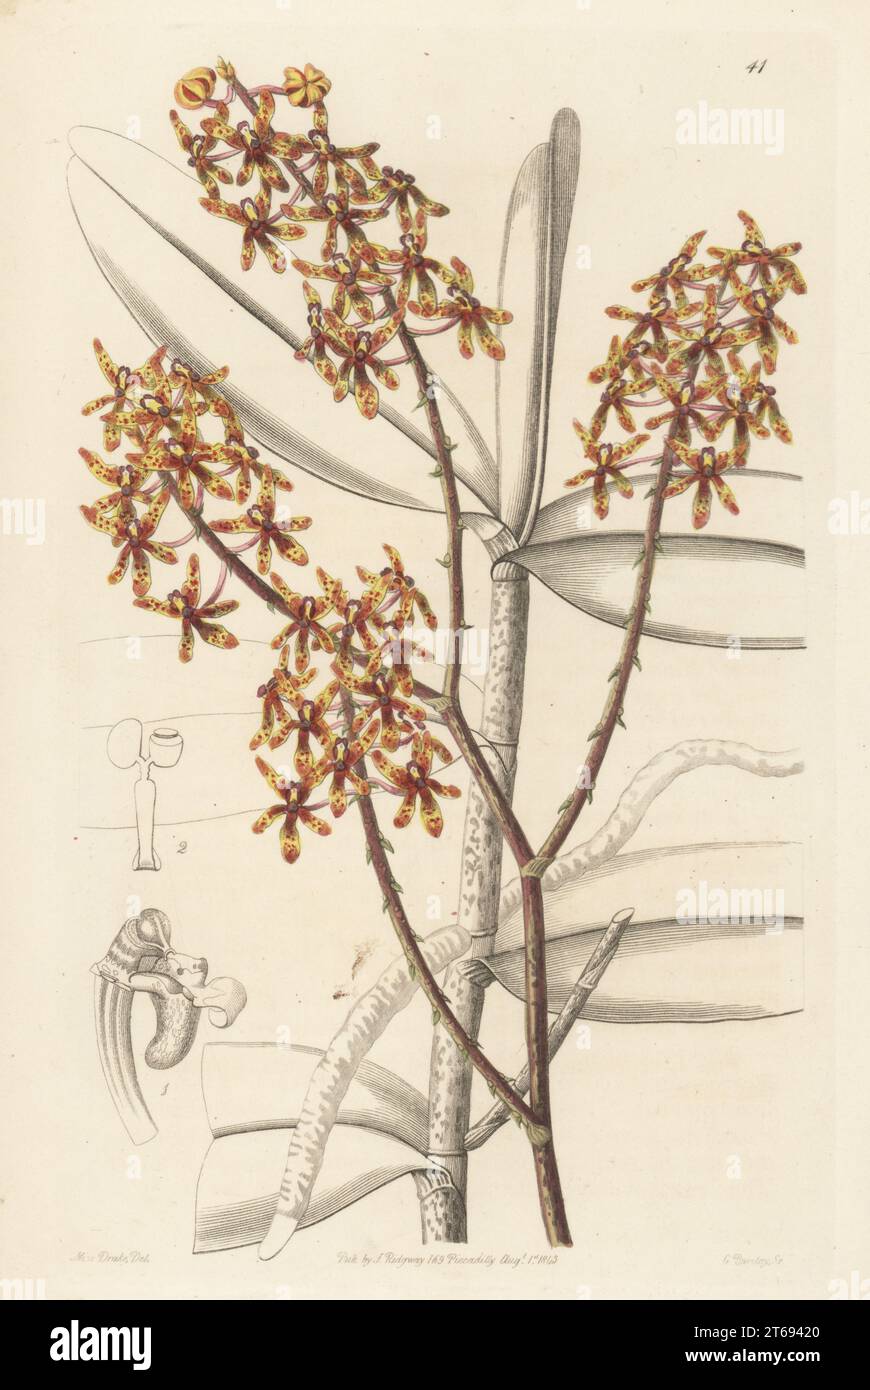 Early blooming renanthera or morning renanthera orchid, Renanthera matutina. Native to Indonesia and Malaysia. Sent by Hugh Cuming from Manila and flowered at Chatsworth. Handcoloured copperplate engraving by George Barclay after a botanical illustration by Sarah Drake from Edwards Botanical Register, continued by John Lindley, published by James Ridgway, London, 1843. Stock Photo